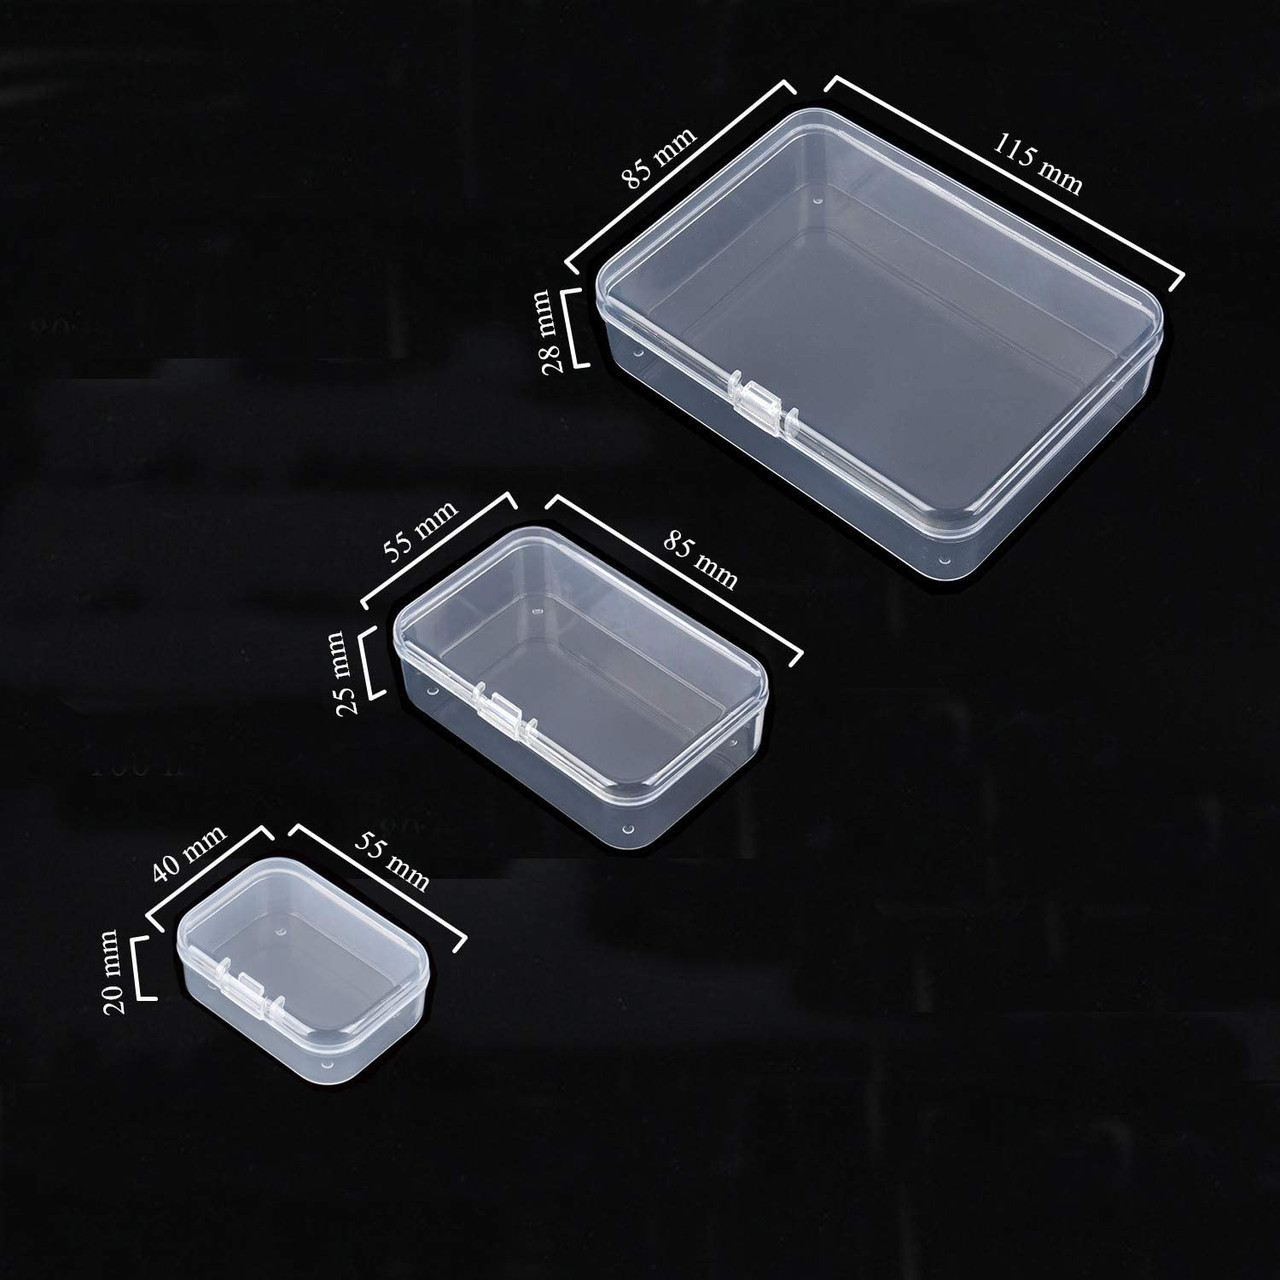 LJY 28 Pieces Mixed Sizes Rectangular Empty Mini Plastic Storage Containers  with Lids LJY Technology Inc Official Website